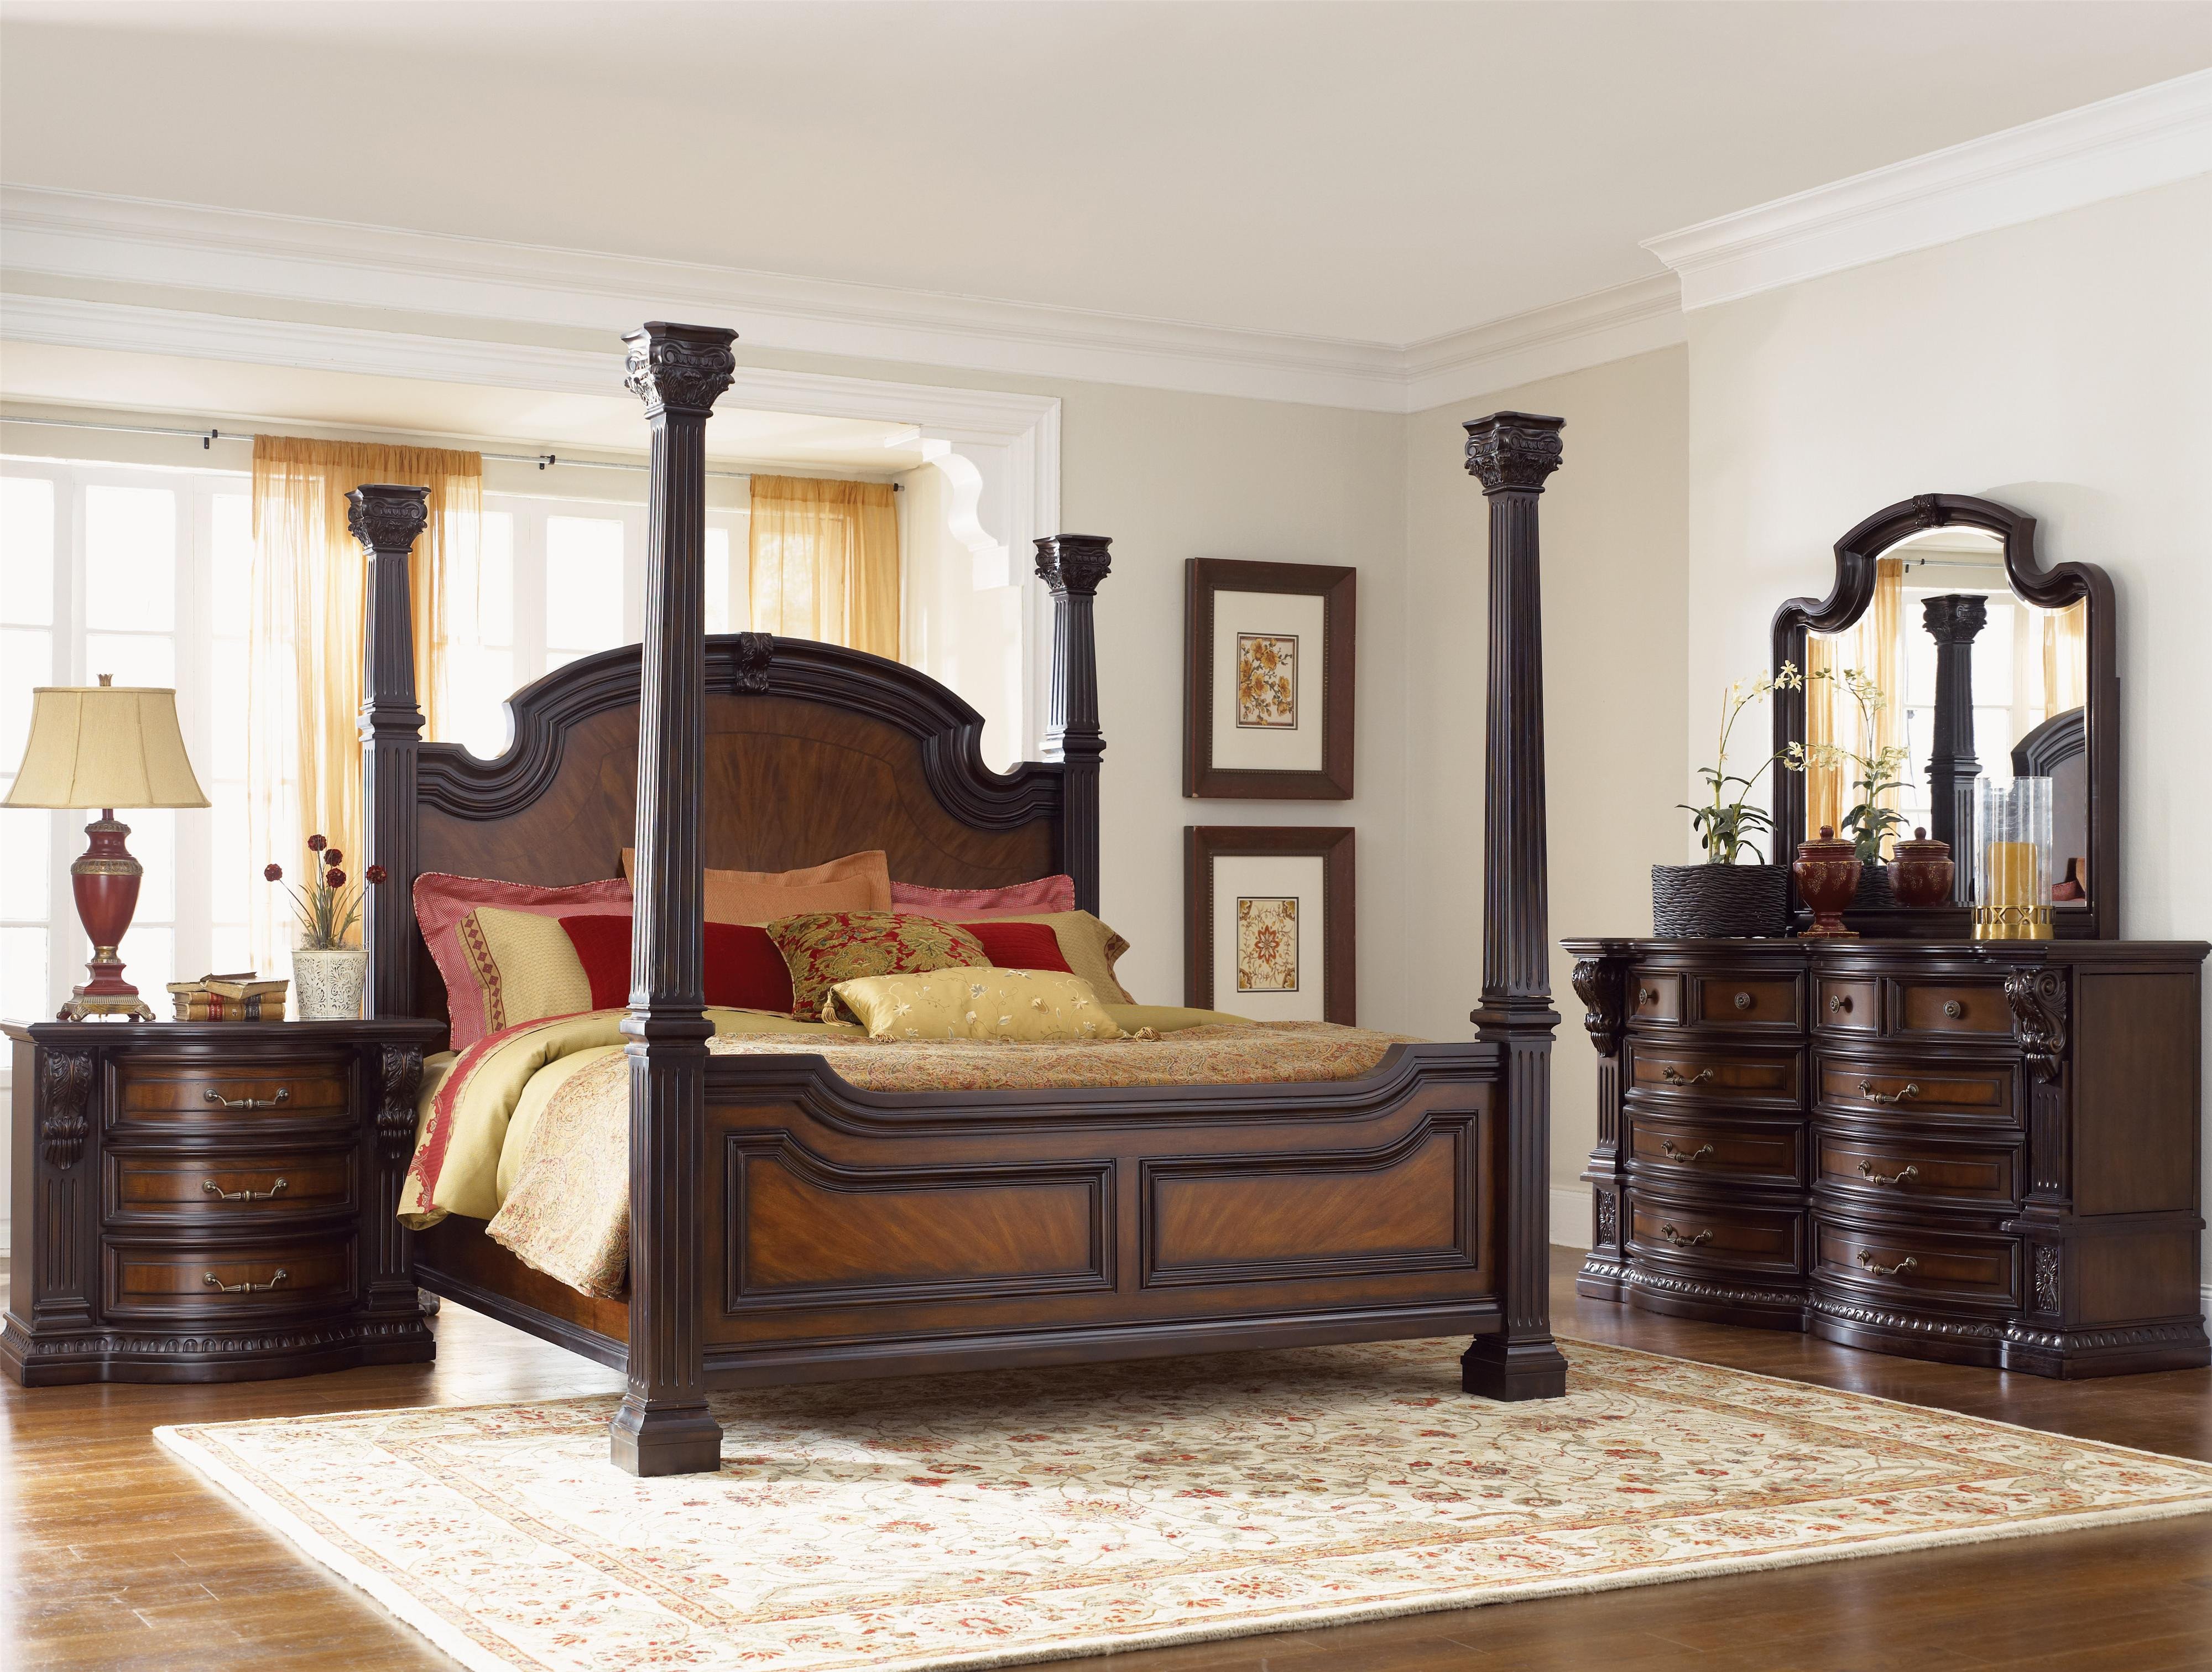 20 New 7 Piece Bedroom Set King | Findzhome